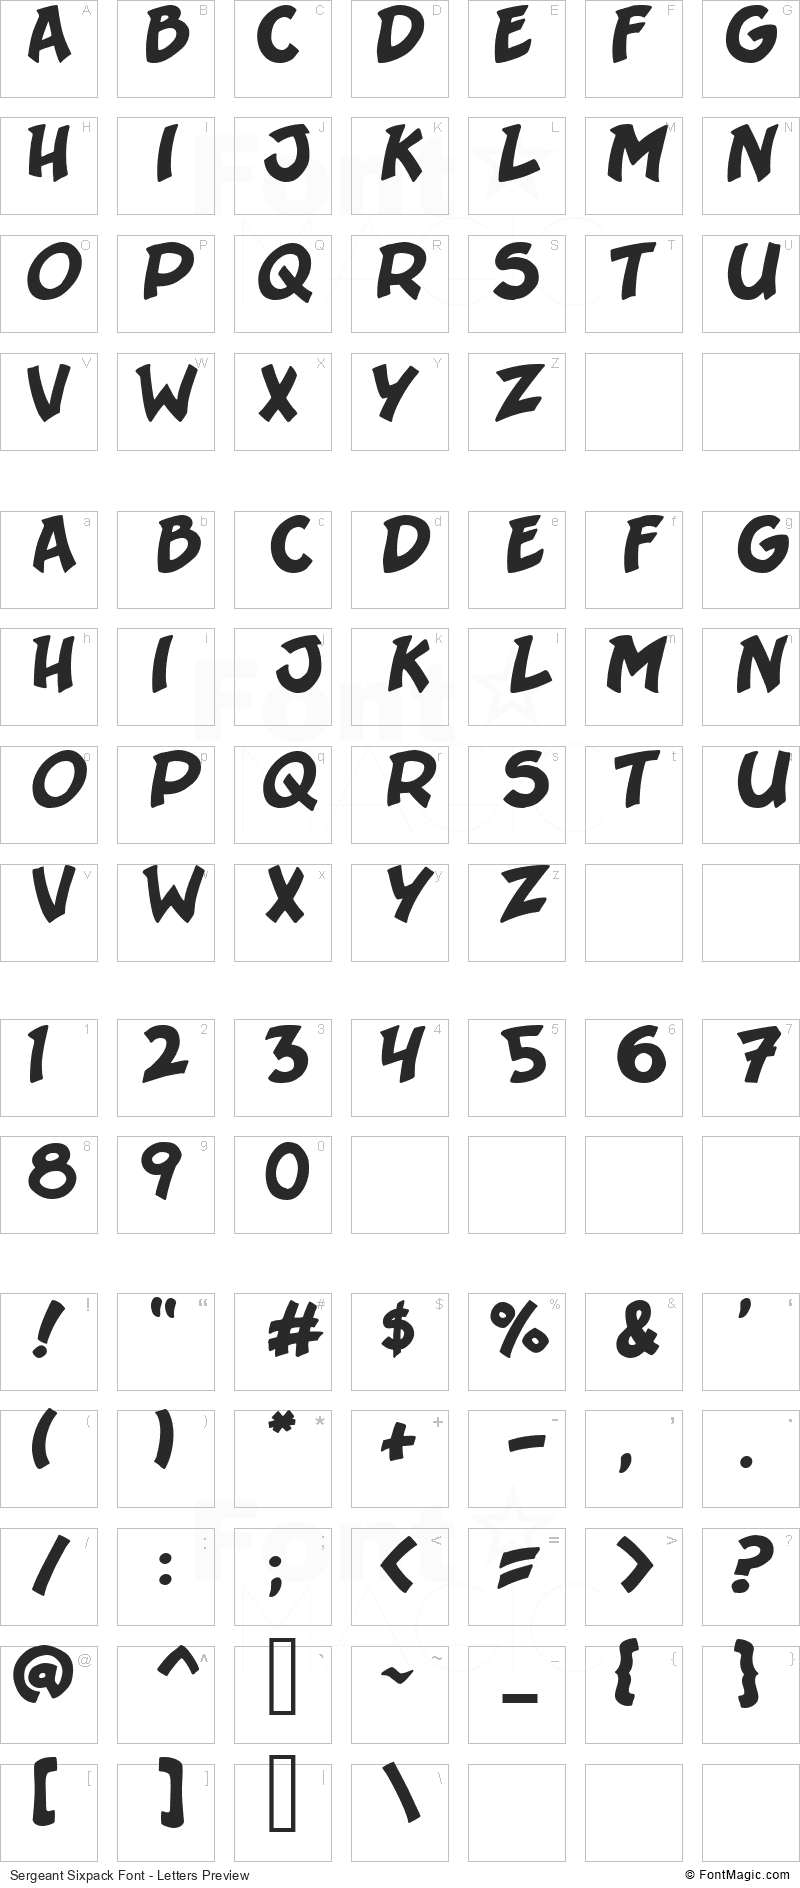 Sergeant Sixpack Font - All Latters Preview Chart